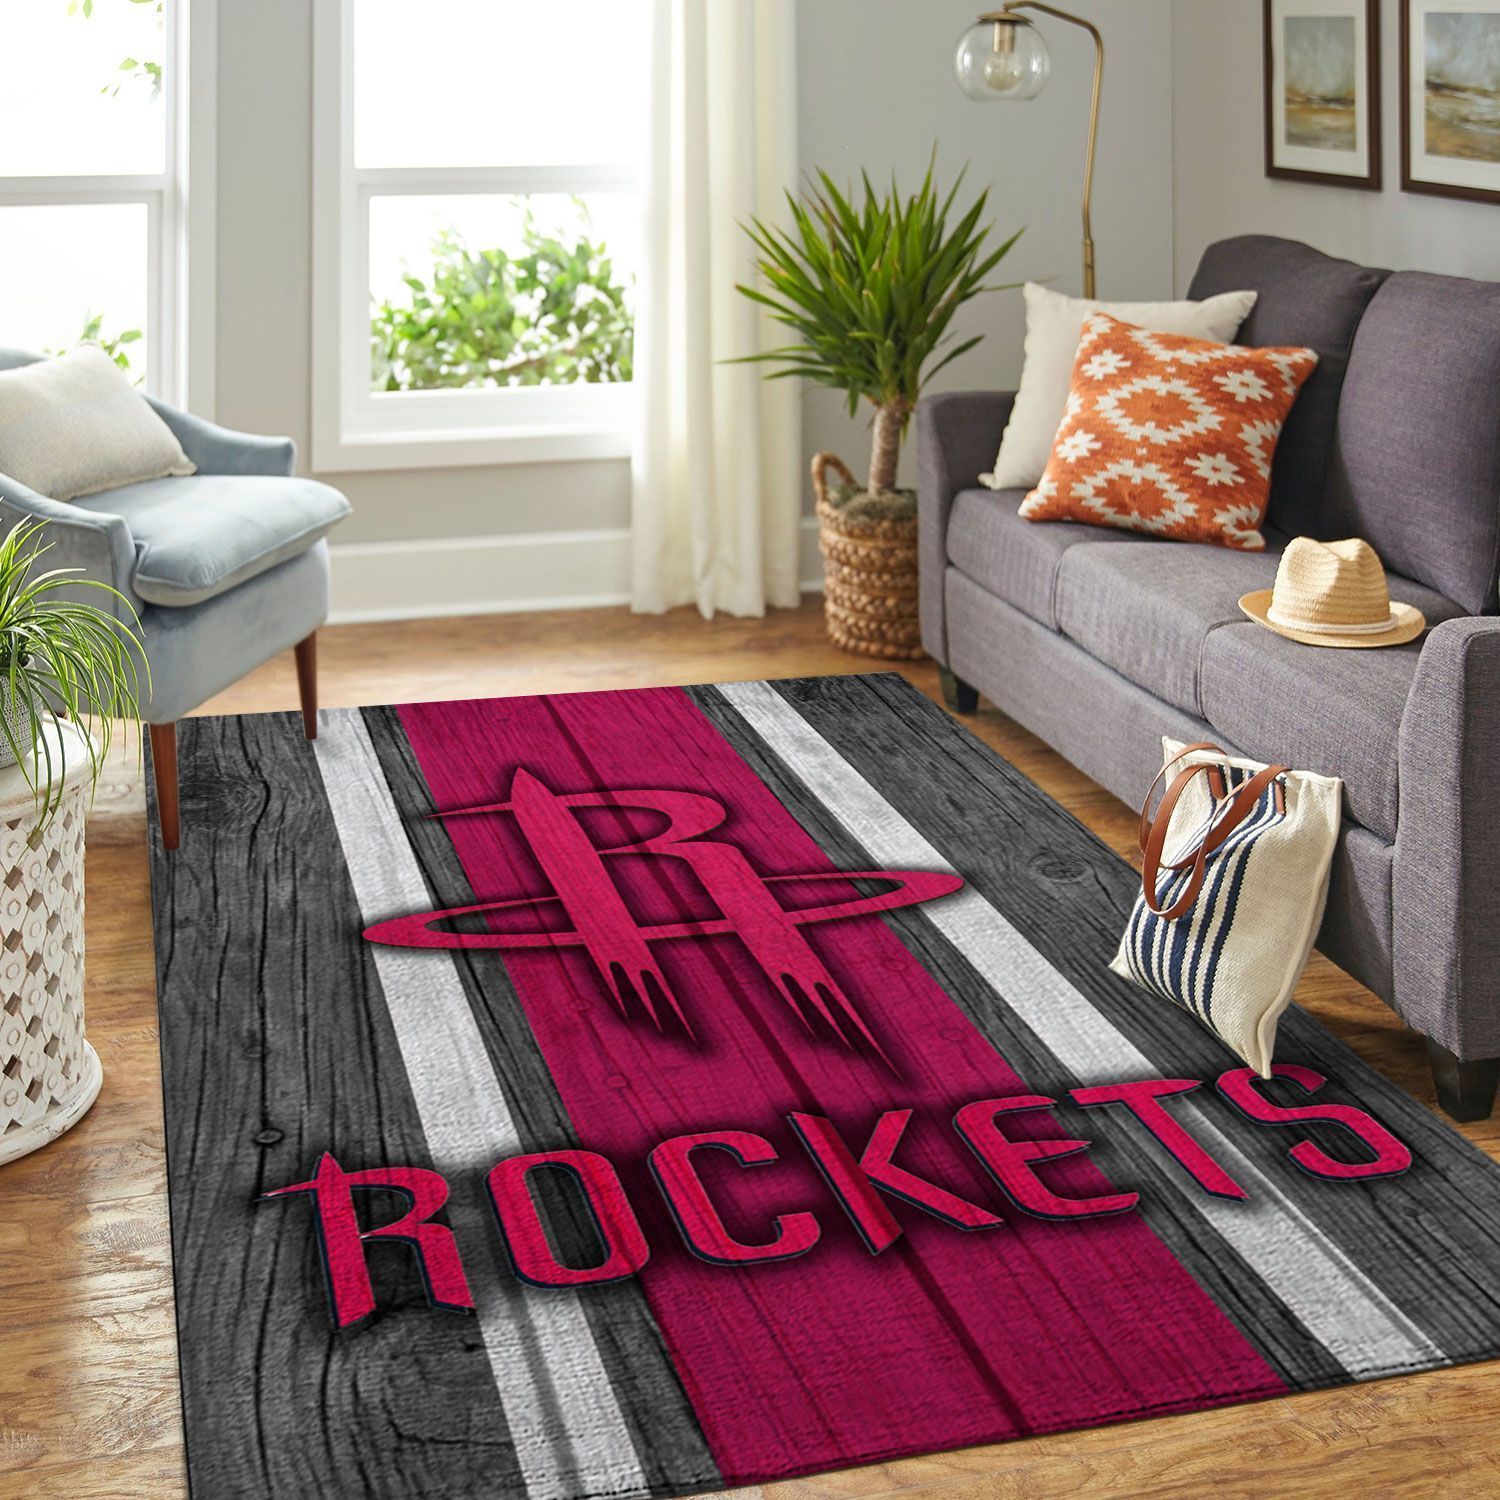 Houston Rockets Nba Team Logo Wooden Style Nice Gift Home Decor Rectangle Area Rug - Indoor Outdoor Rugs 2